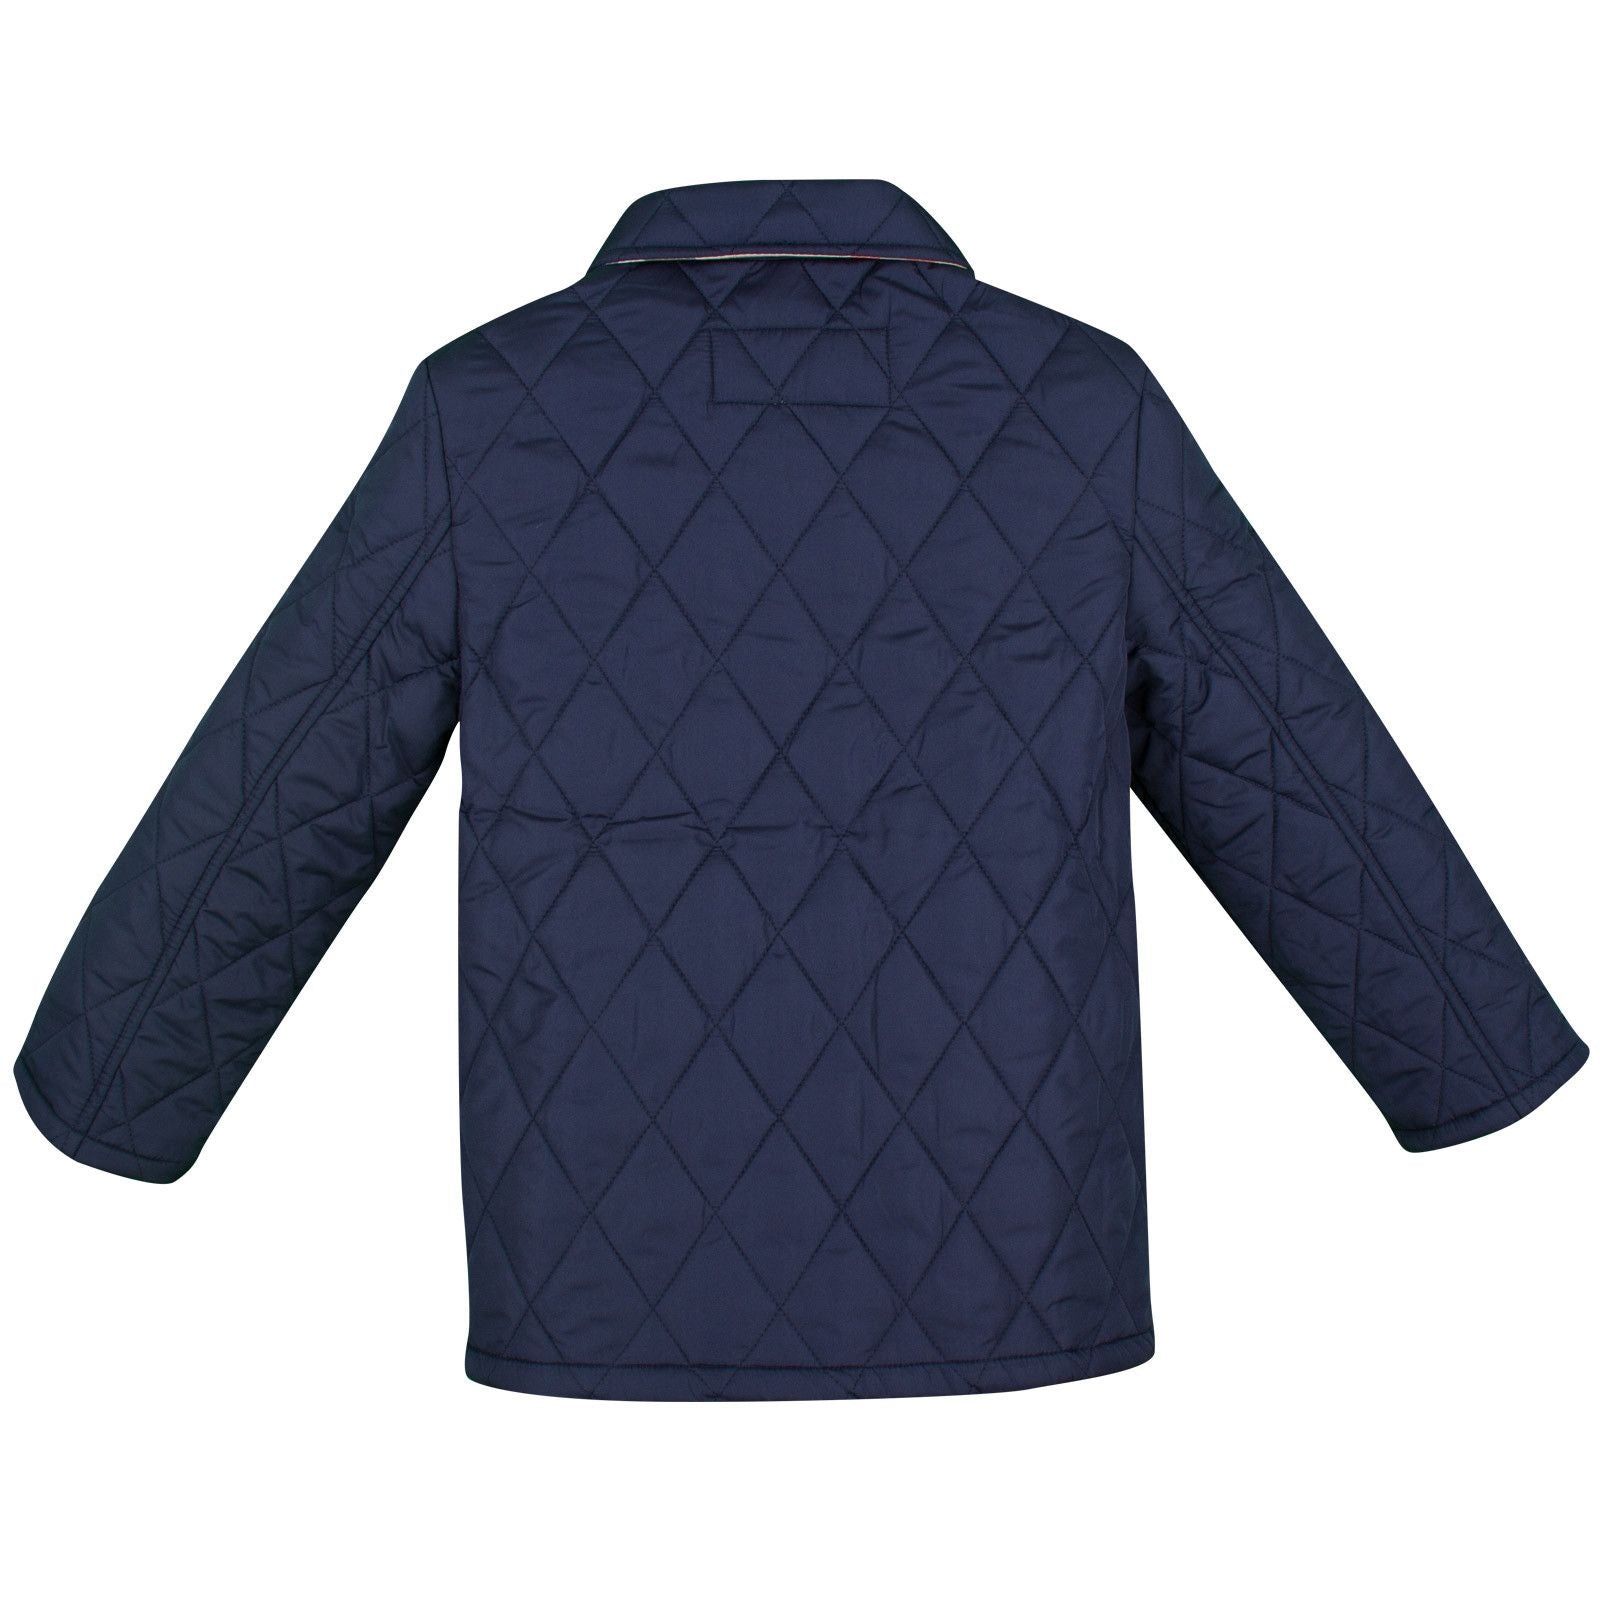 Boys Navy Blue Quilted Jacket With Classic Check Trims - CÉMAROSE | Children's Fashion Store - 2